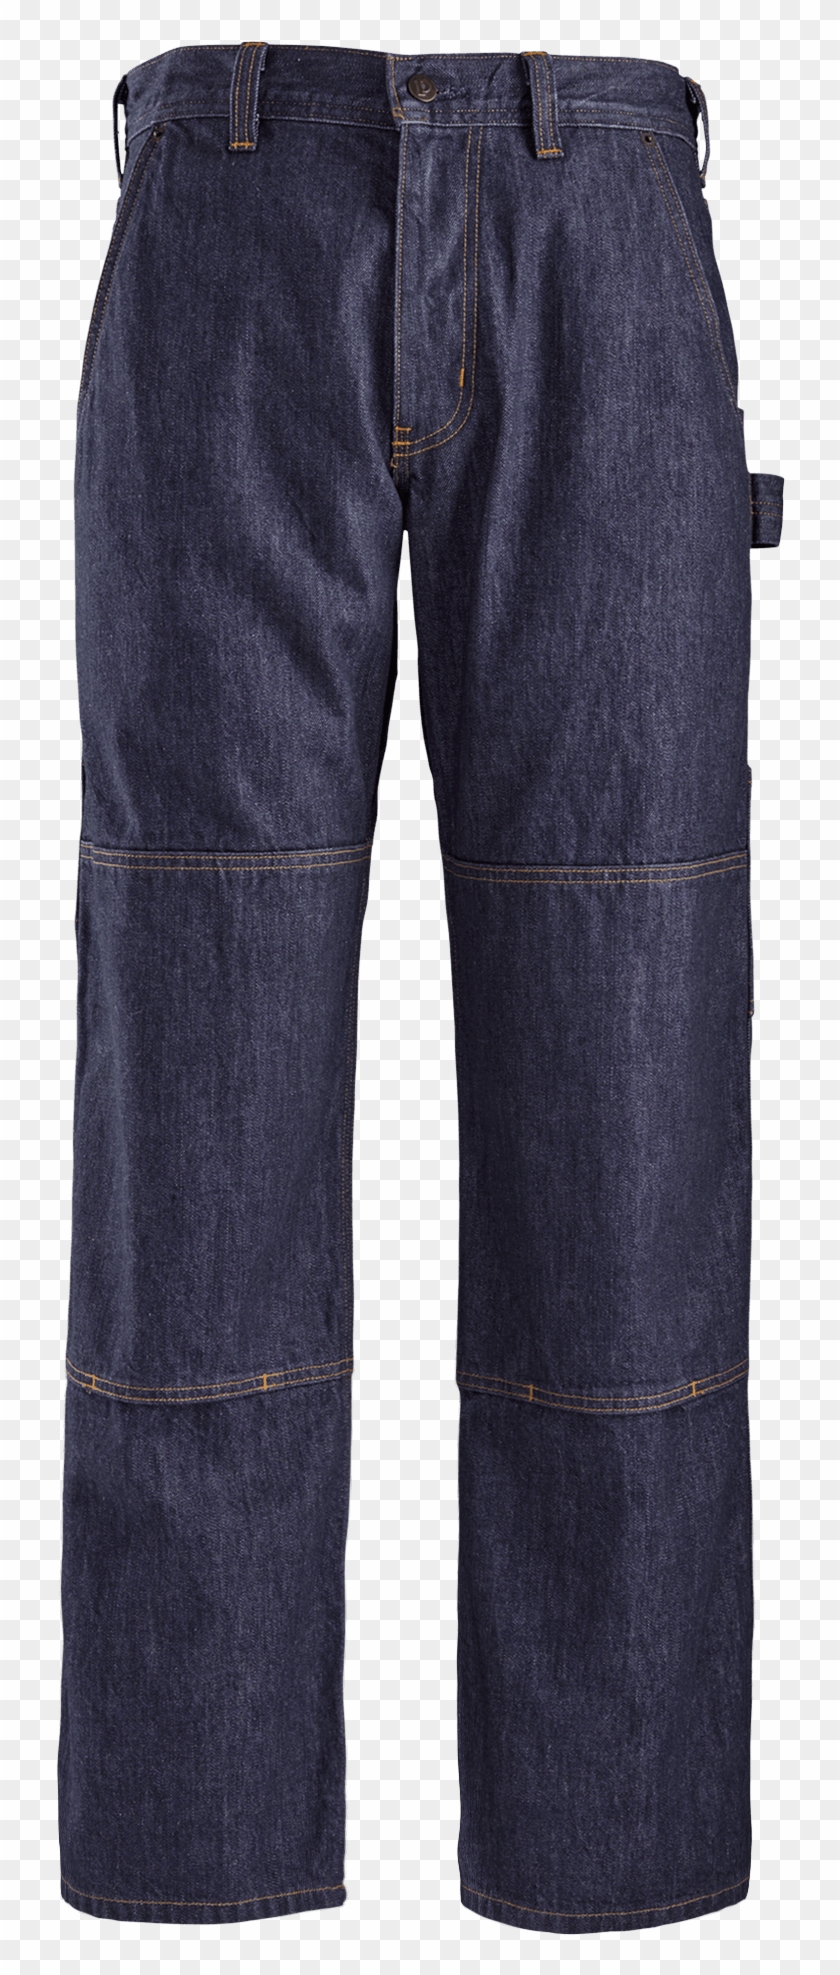 The Organic Cotton Is Grown In Texas, The Fabric Is - Long Pants For Farmer Clipart #5939019